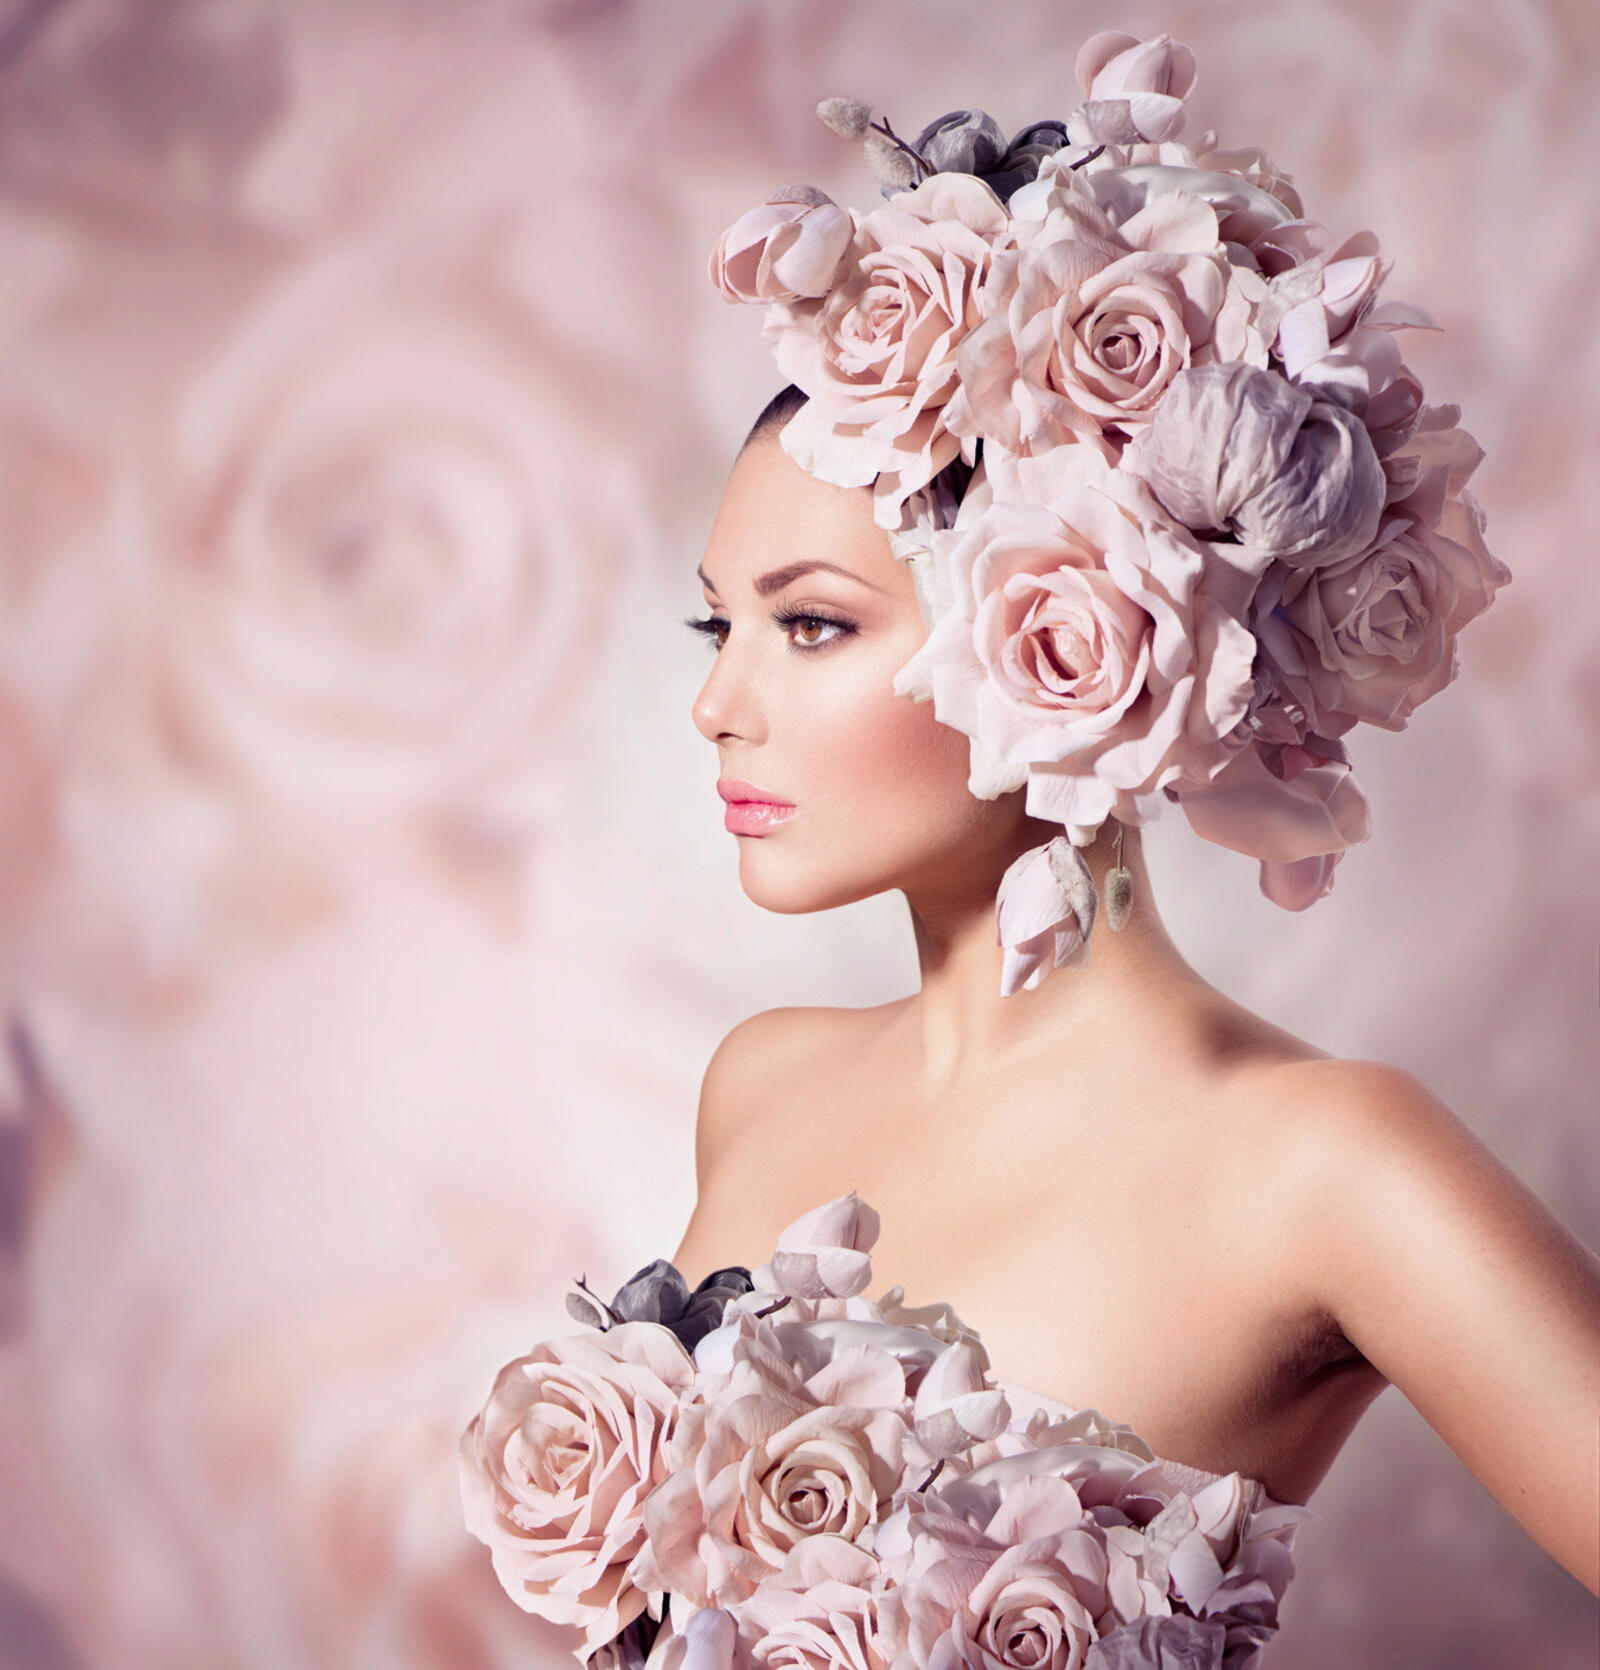 Wallpapers make-up pink roses a girl on the desktop